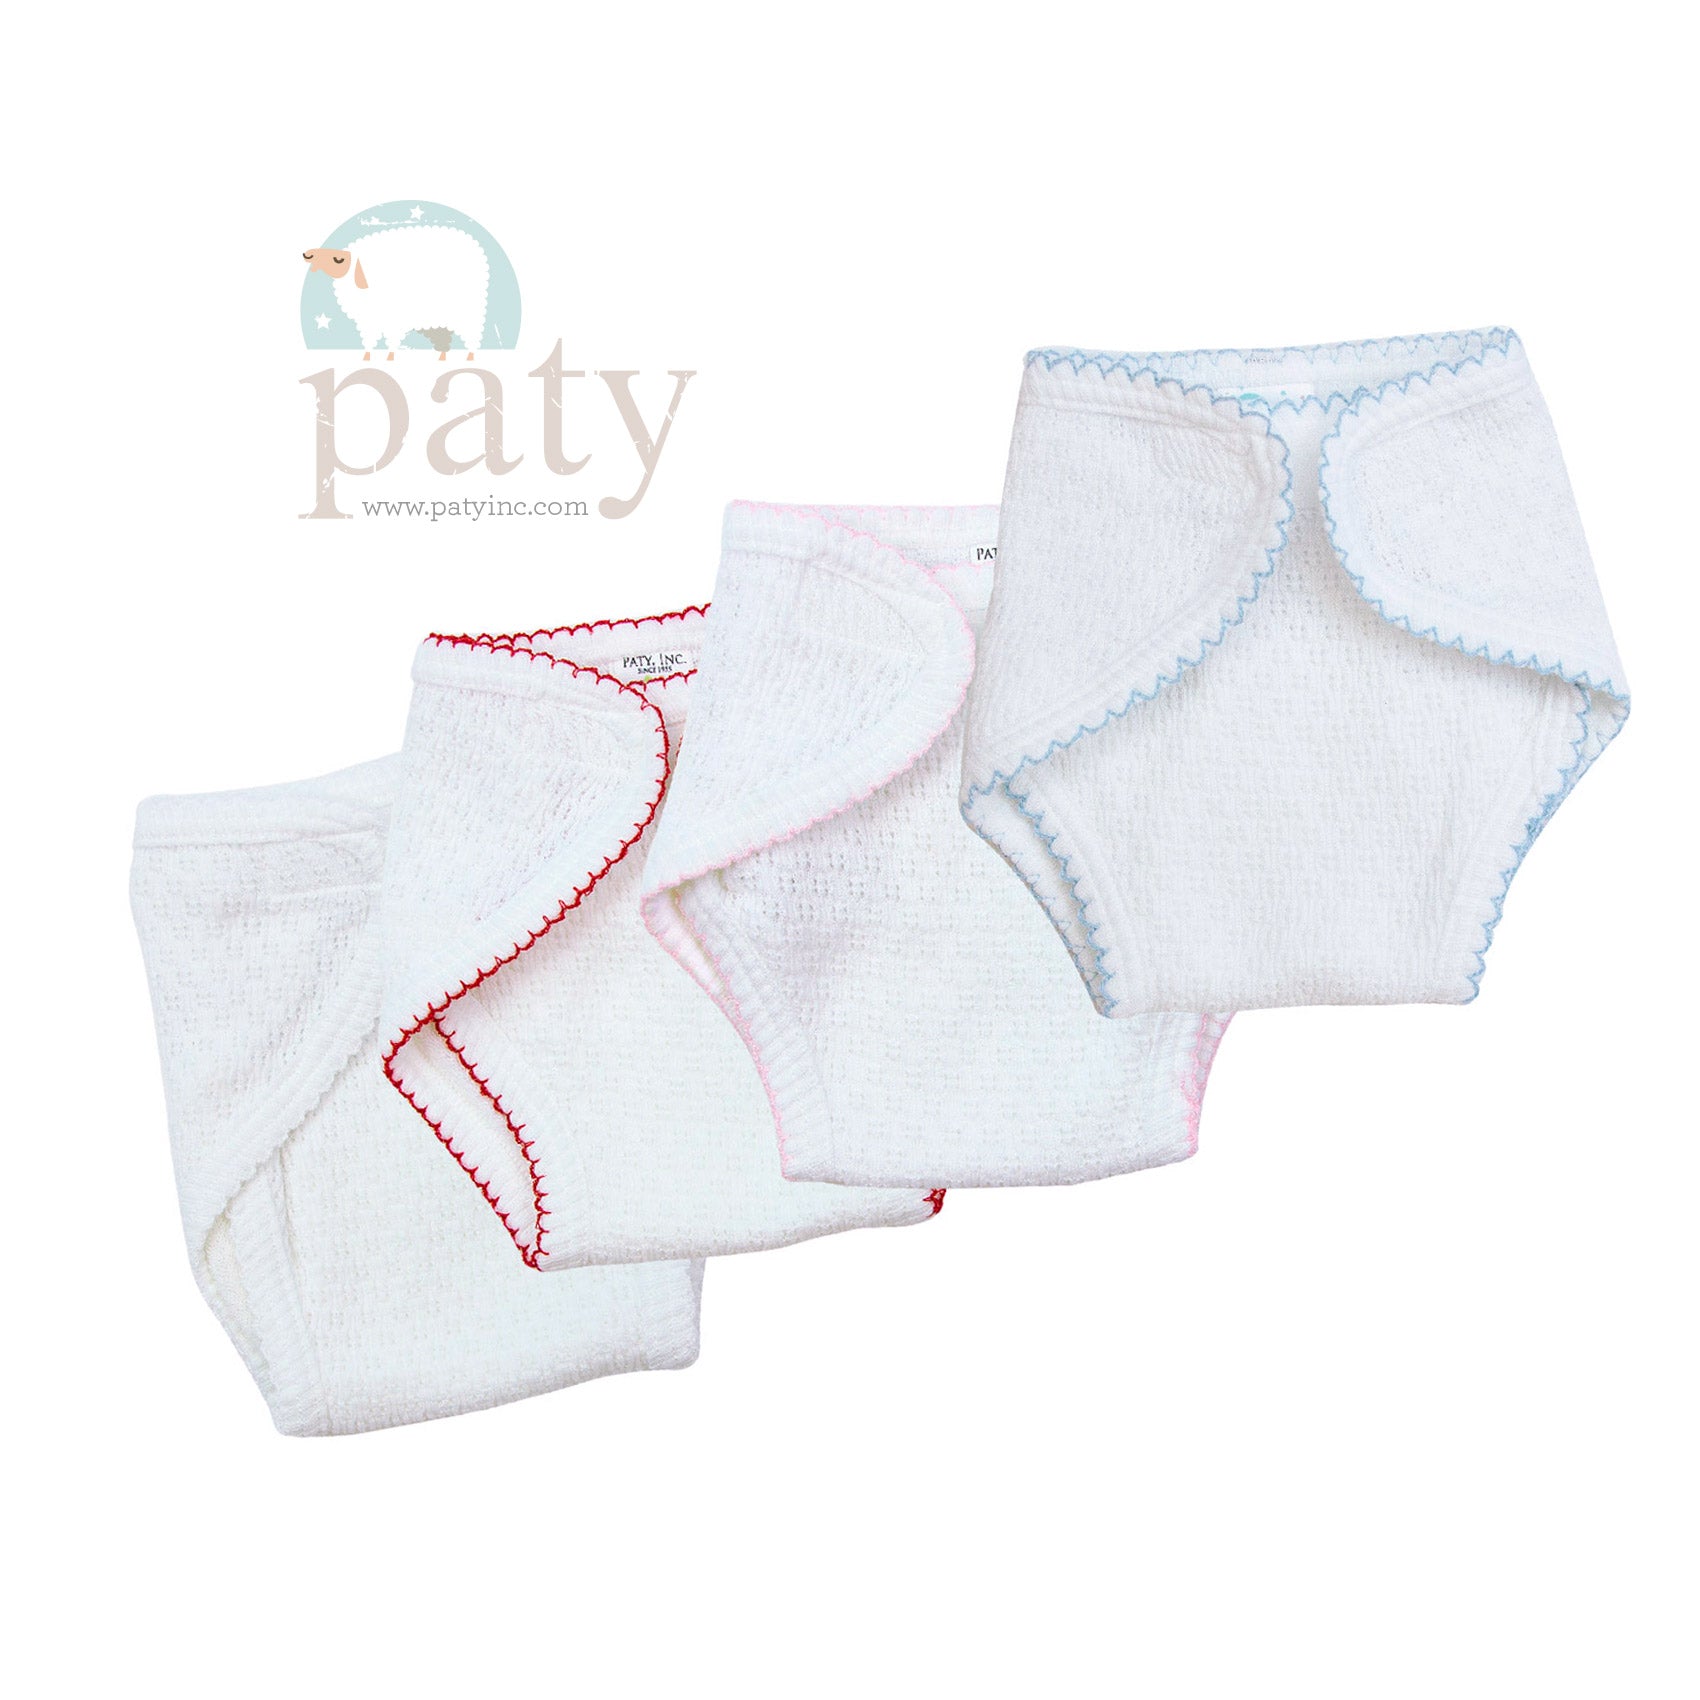 Paty Diaper Covers